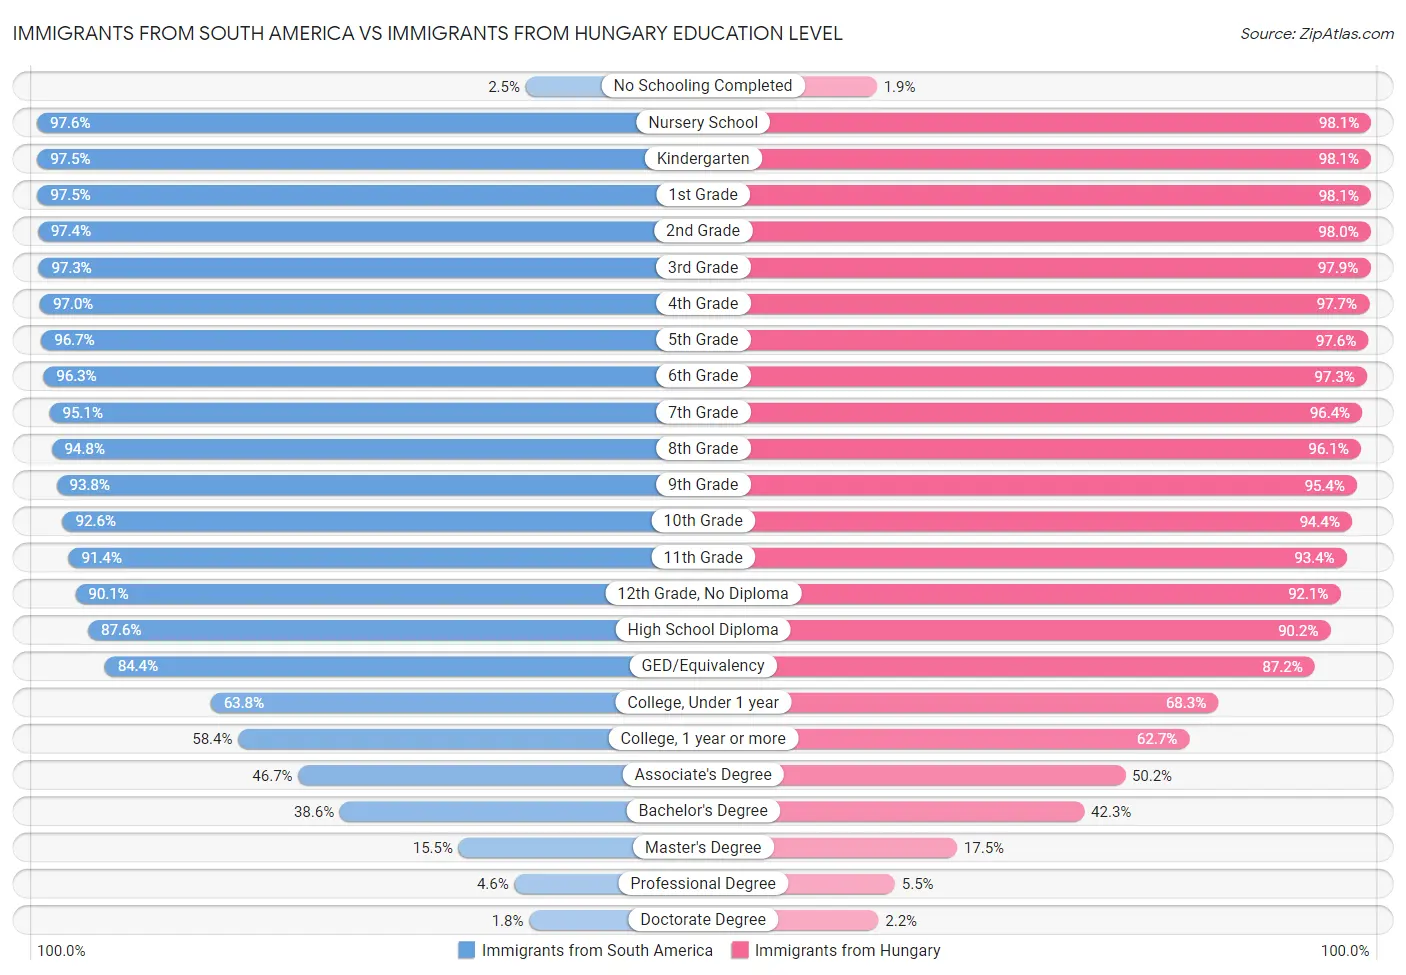 Immigrants from South America vs Immigrants from Hungary Education Level